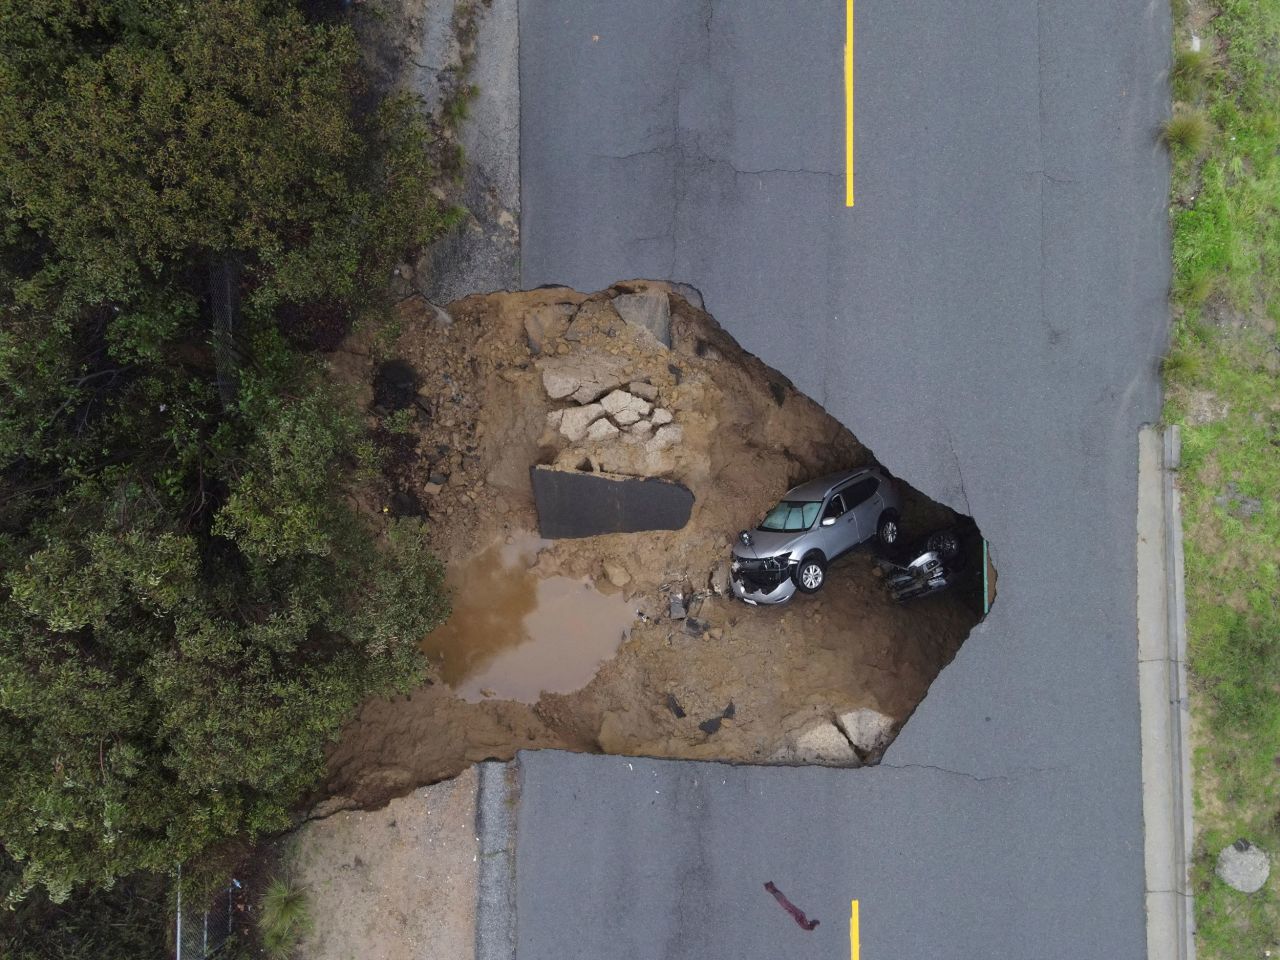 Several people had to be rescued after two vehicles fell into this sinkhole in Chatsworth, California, on Tuesday, January 10.